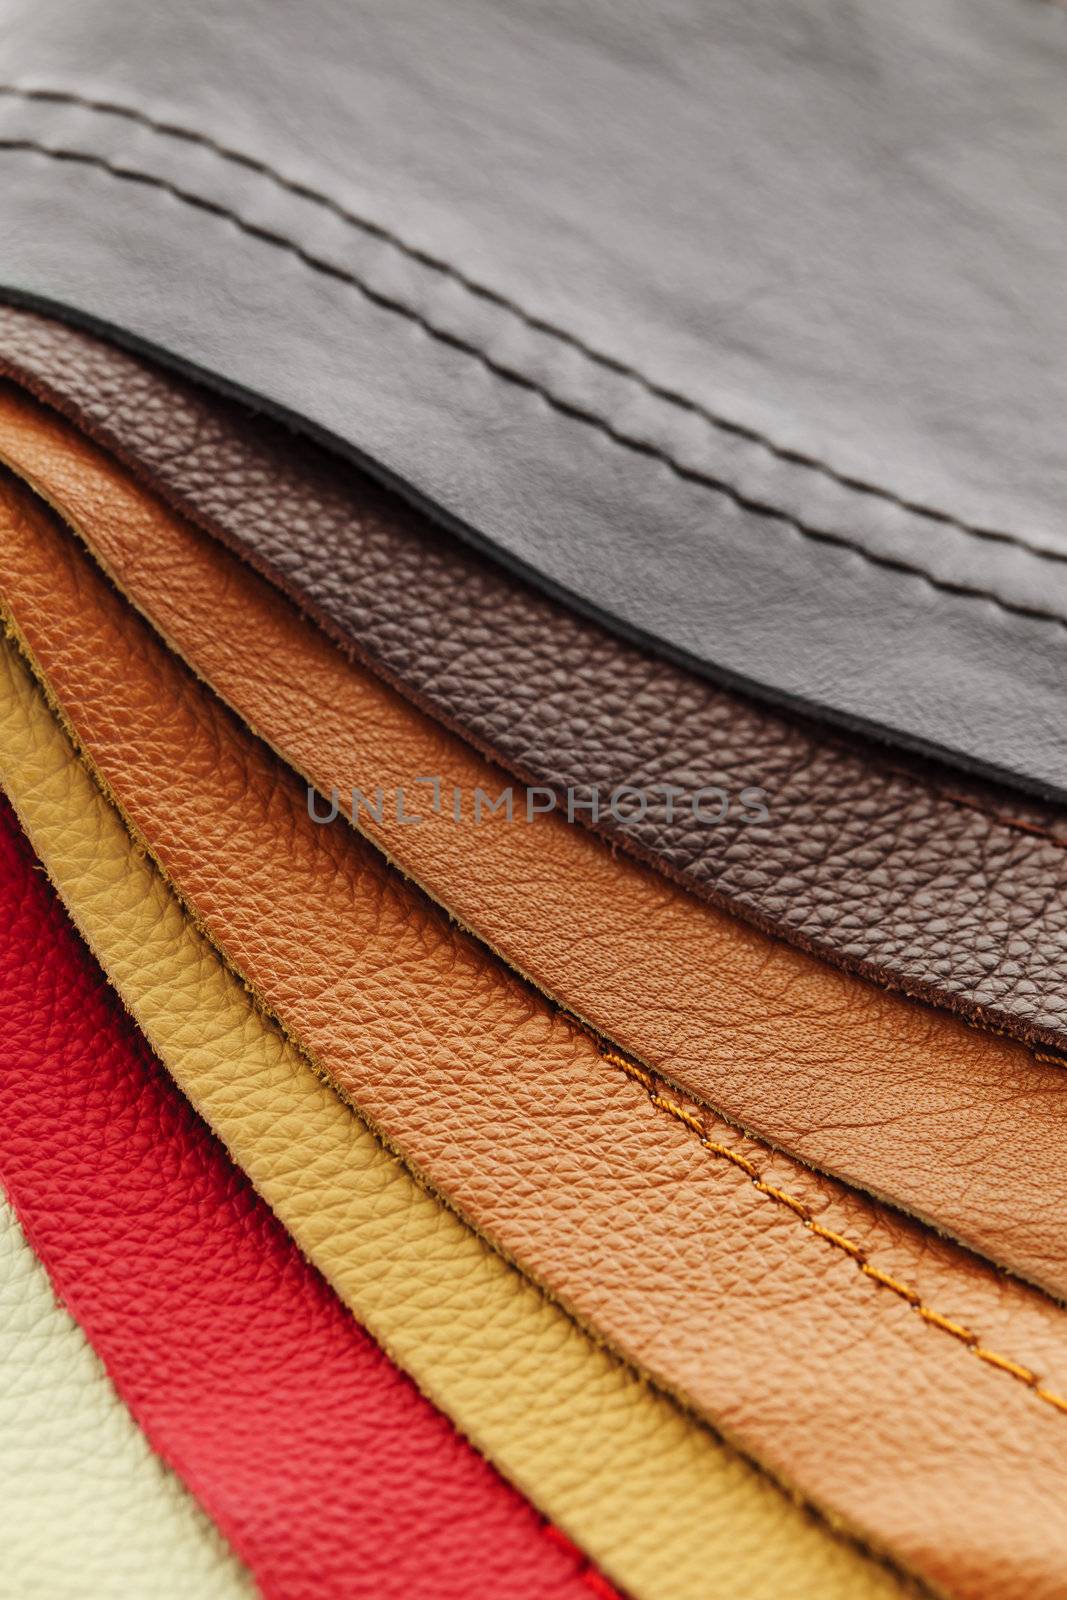 Leather upholstery samples by elenathewise